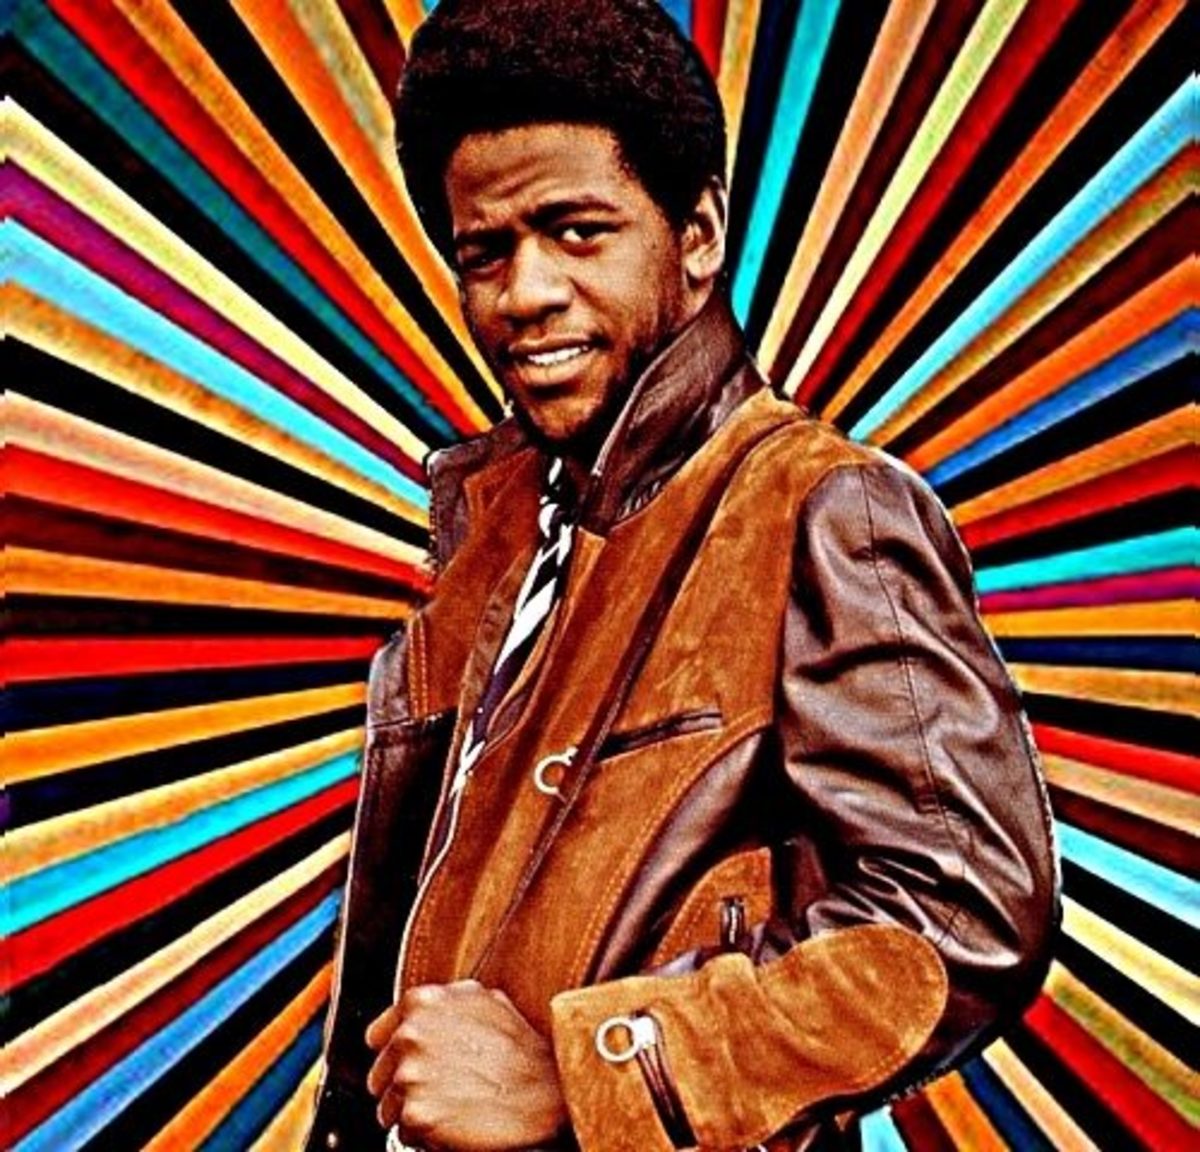 No matter what genre he sings, Al Green's voice makes you stop and listen, tap your foot, snap your fingers, wave your hand